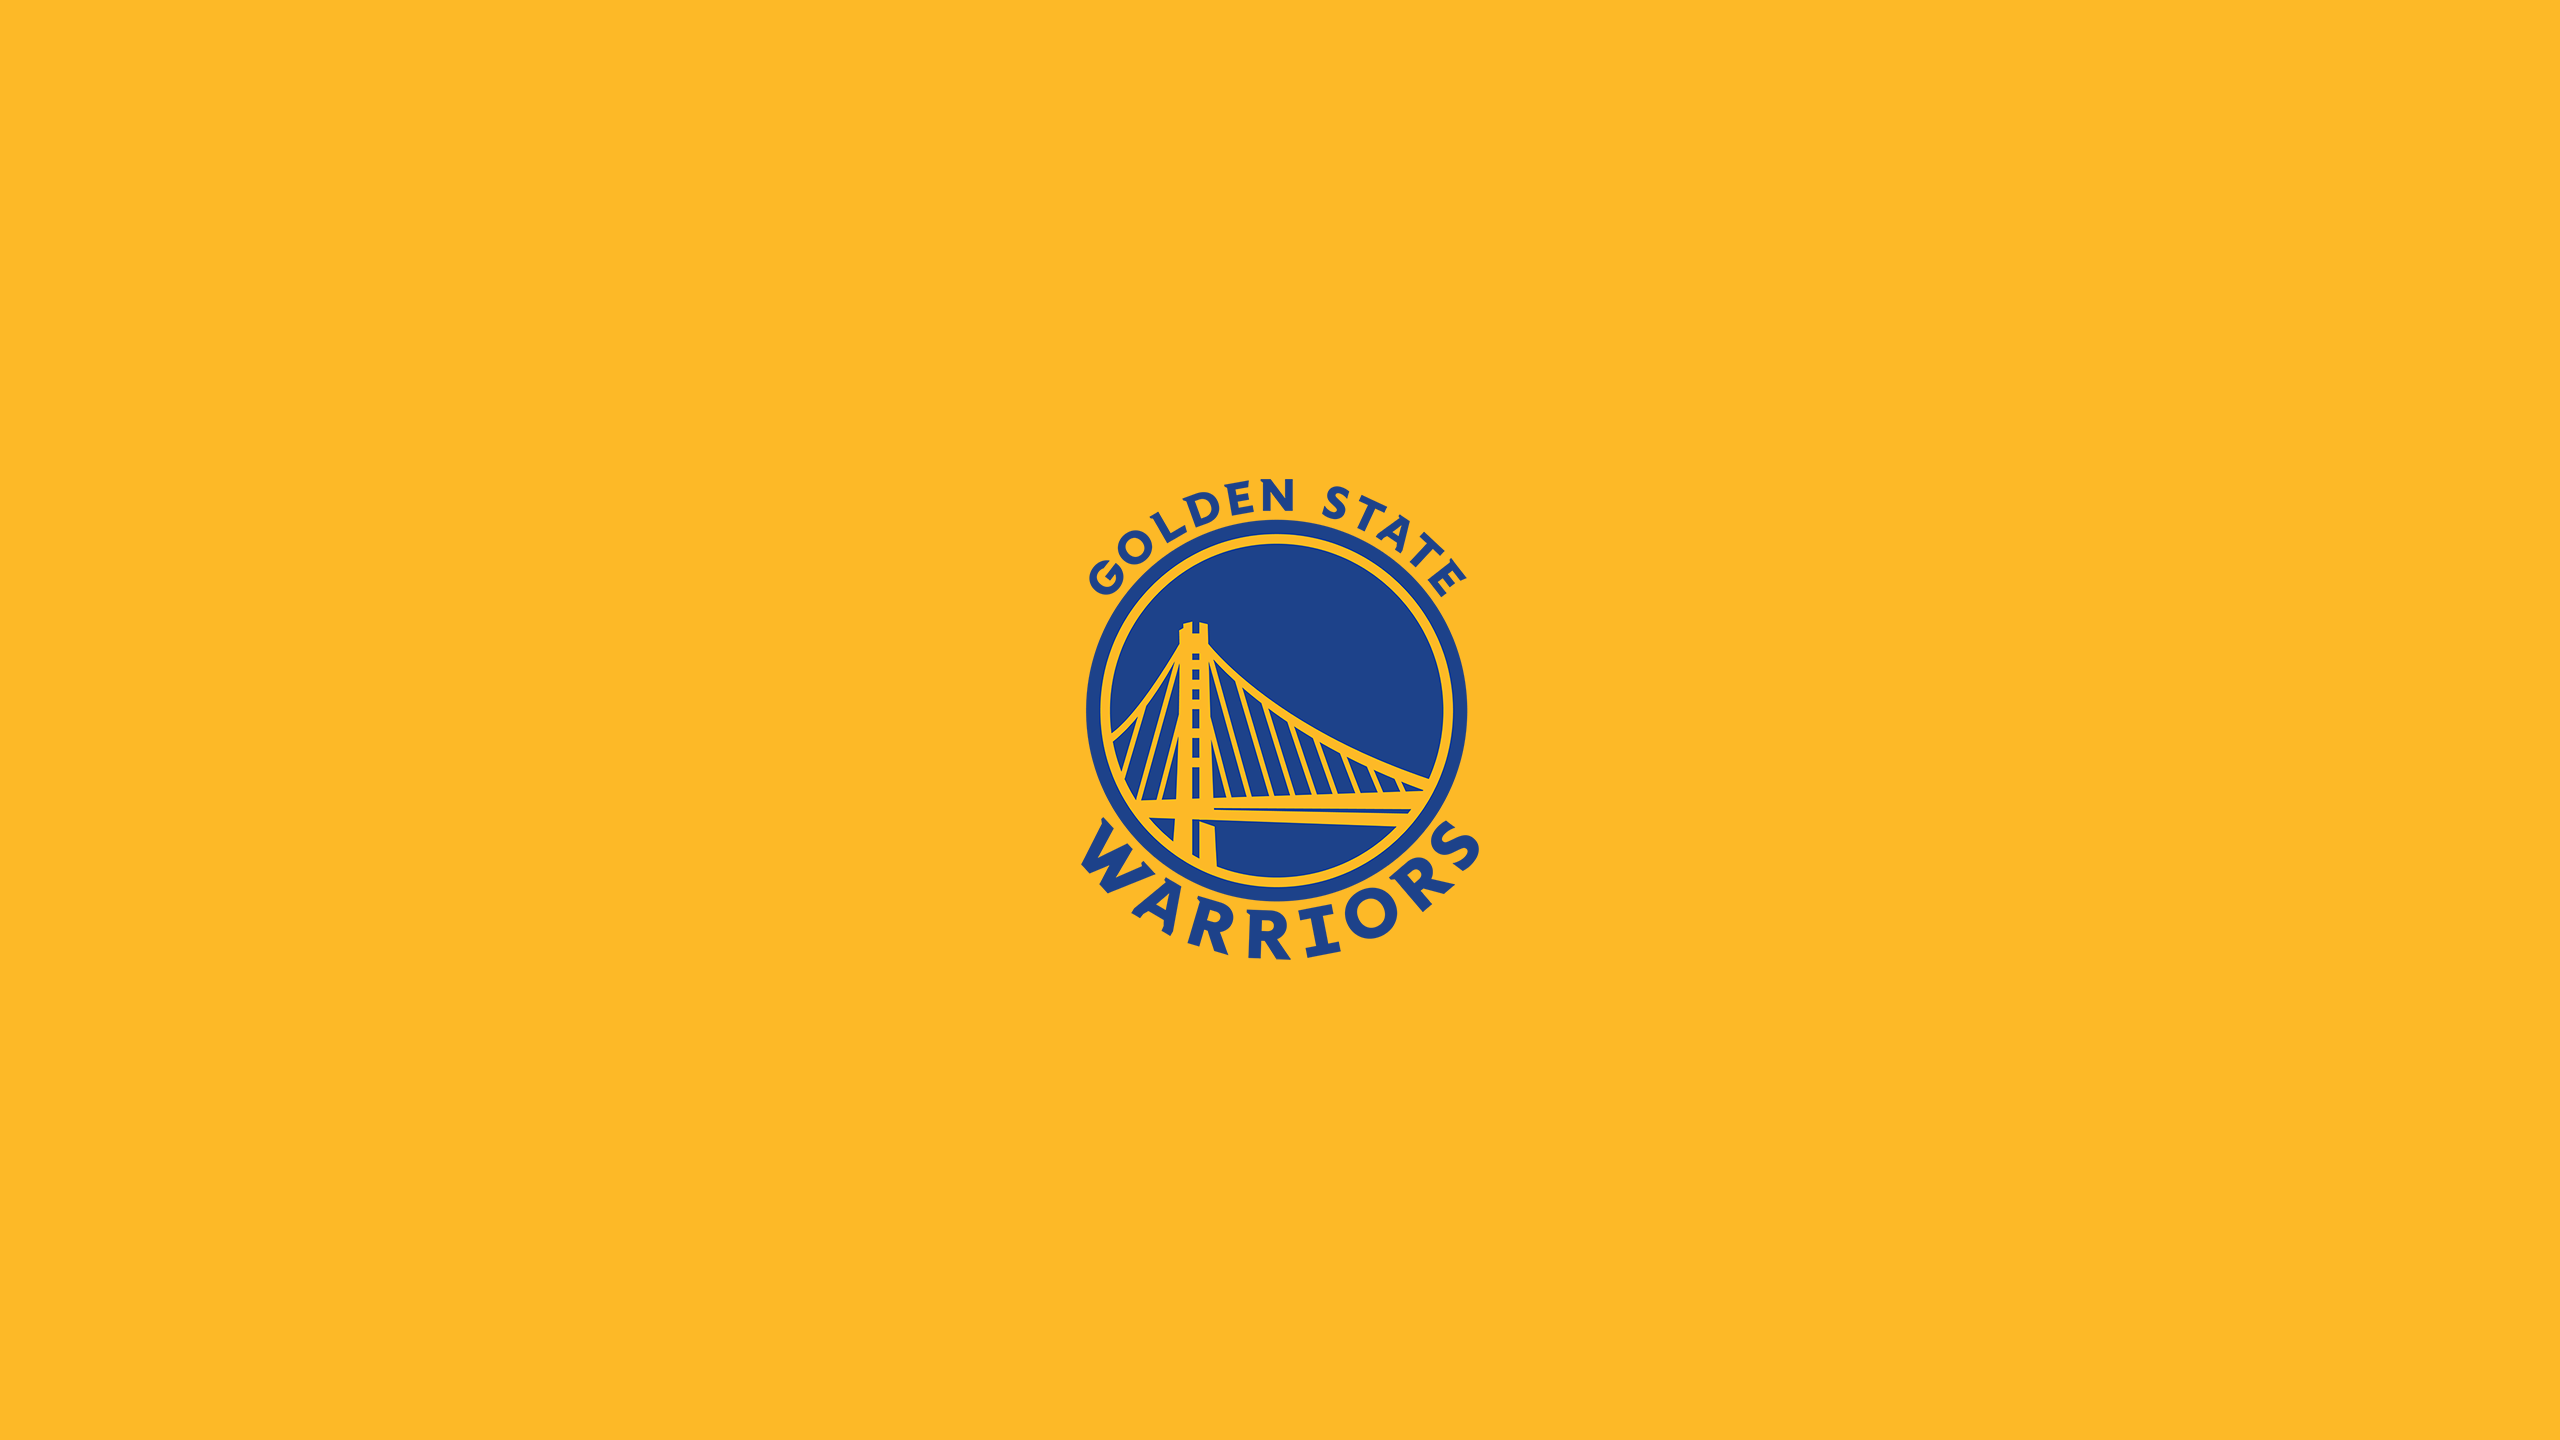 Golden State Warriors - Square Bettor